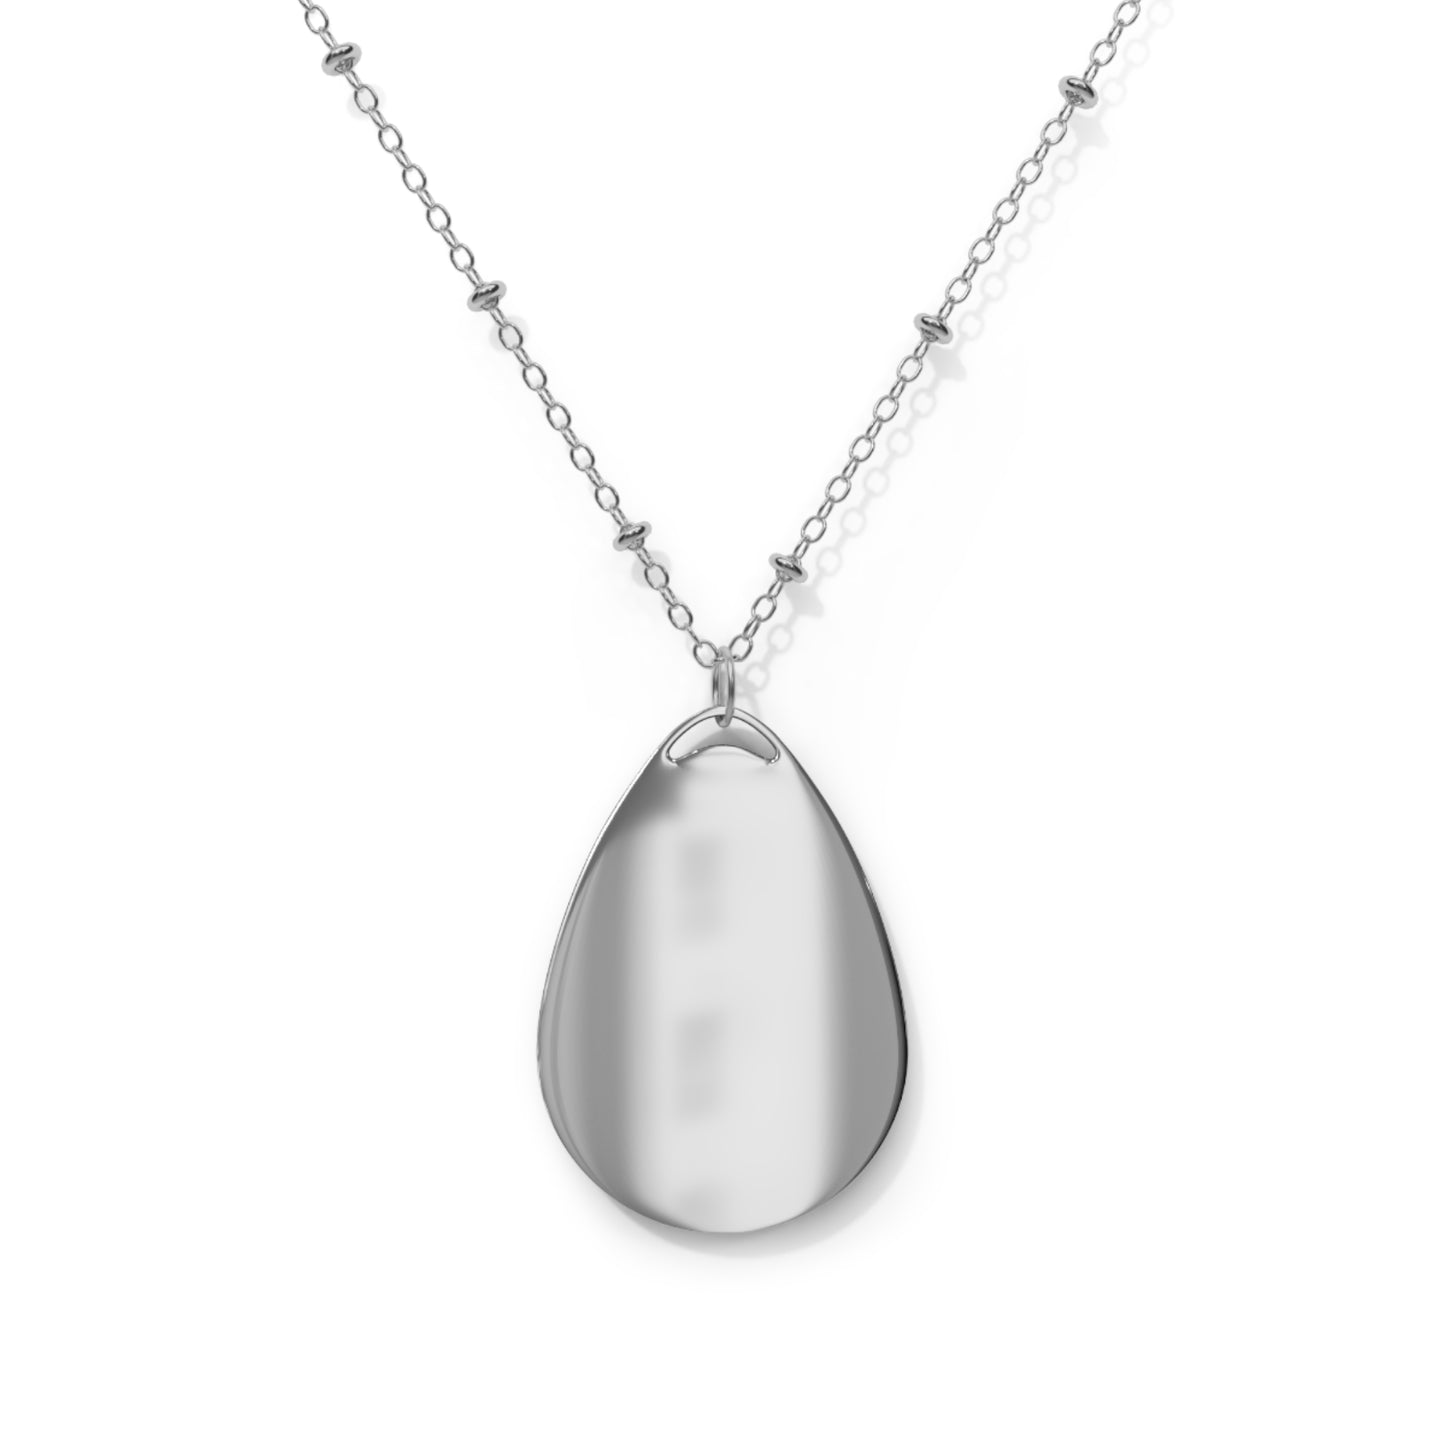 Necklace - Lily of the Valley